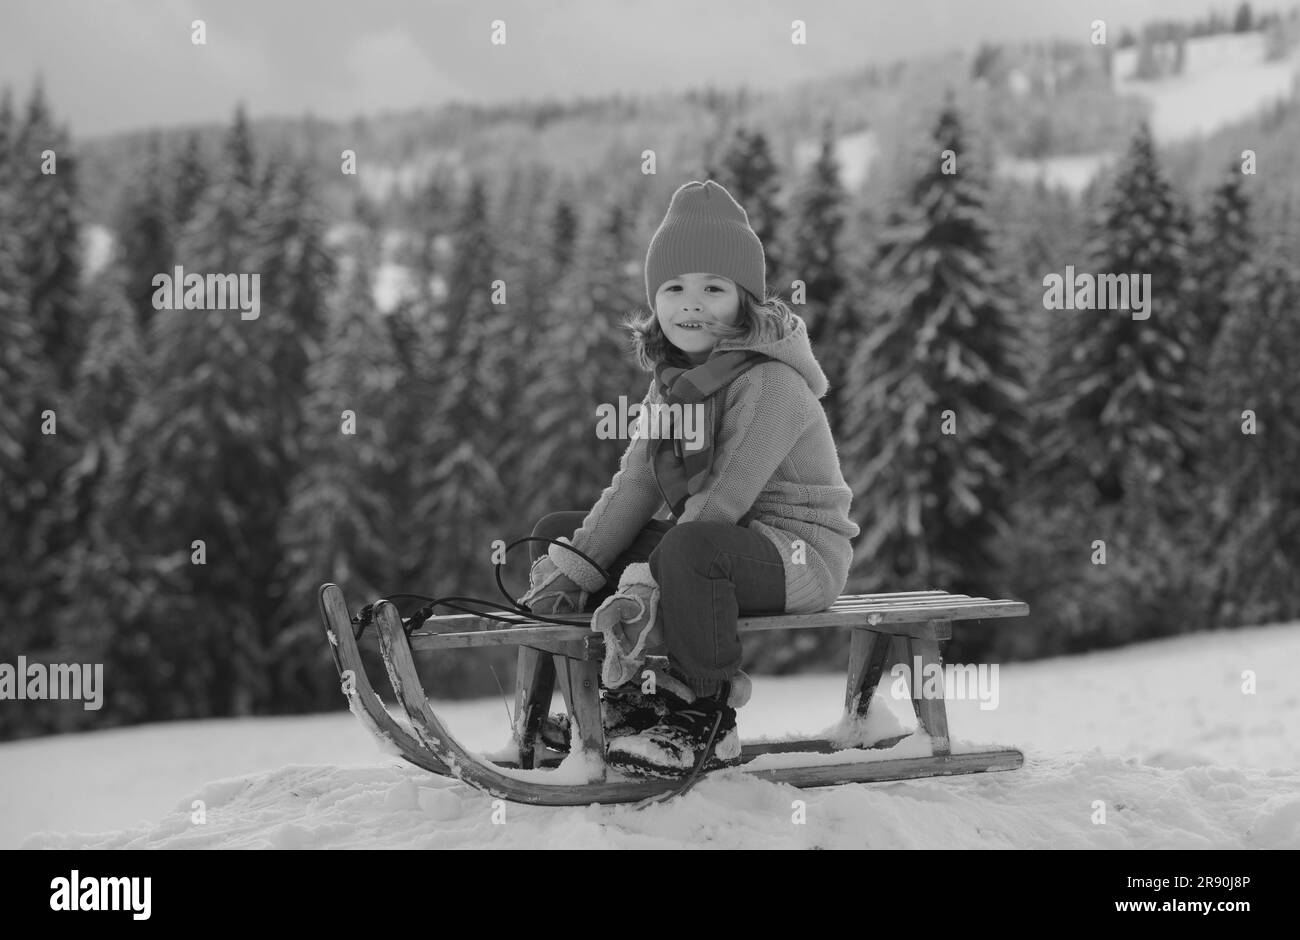 Cute boy enjoying a sleigh ride. Child sledding, riding a sledge play outdoors in snow on winter landscape. Outdoor winter active fun for family vacat Stock Photo